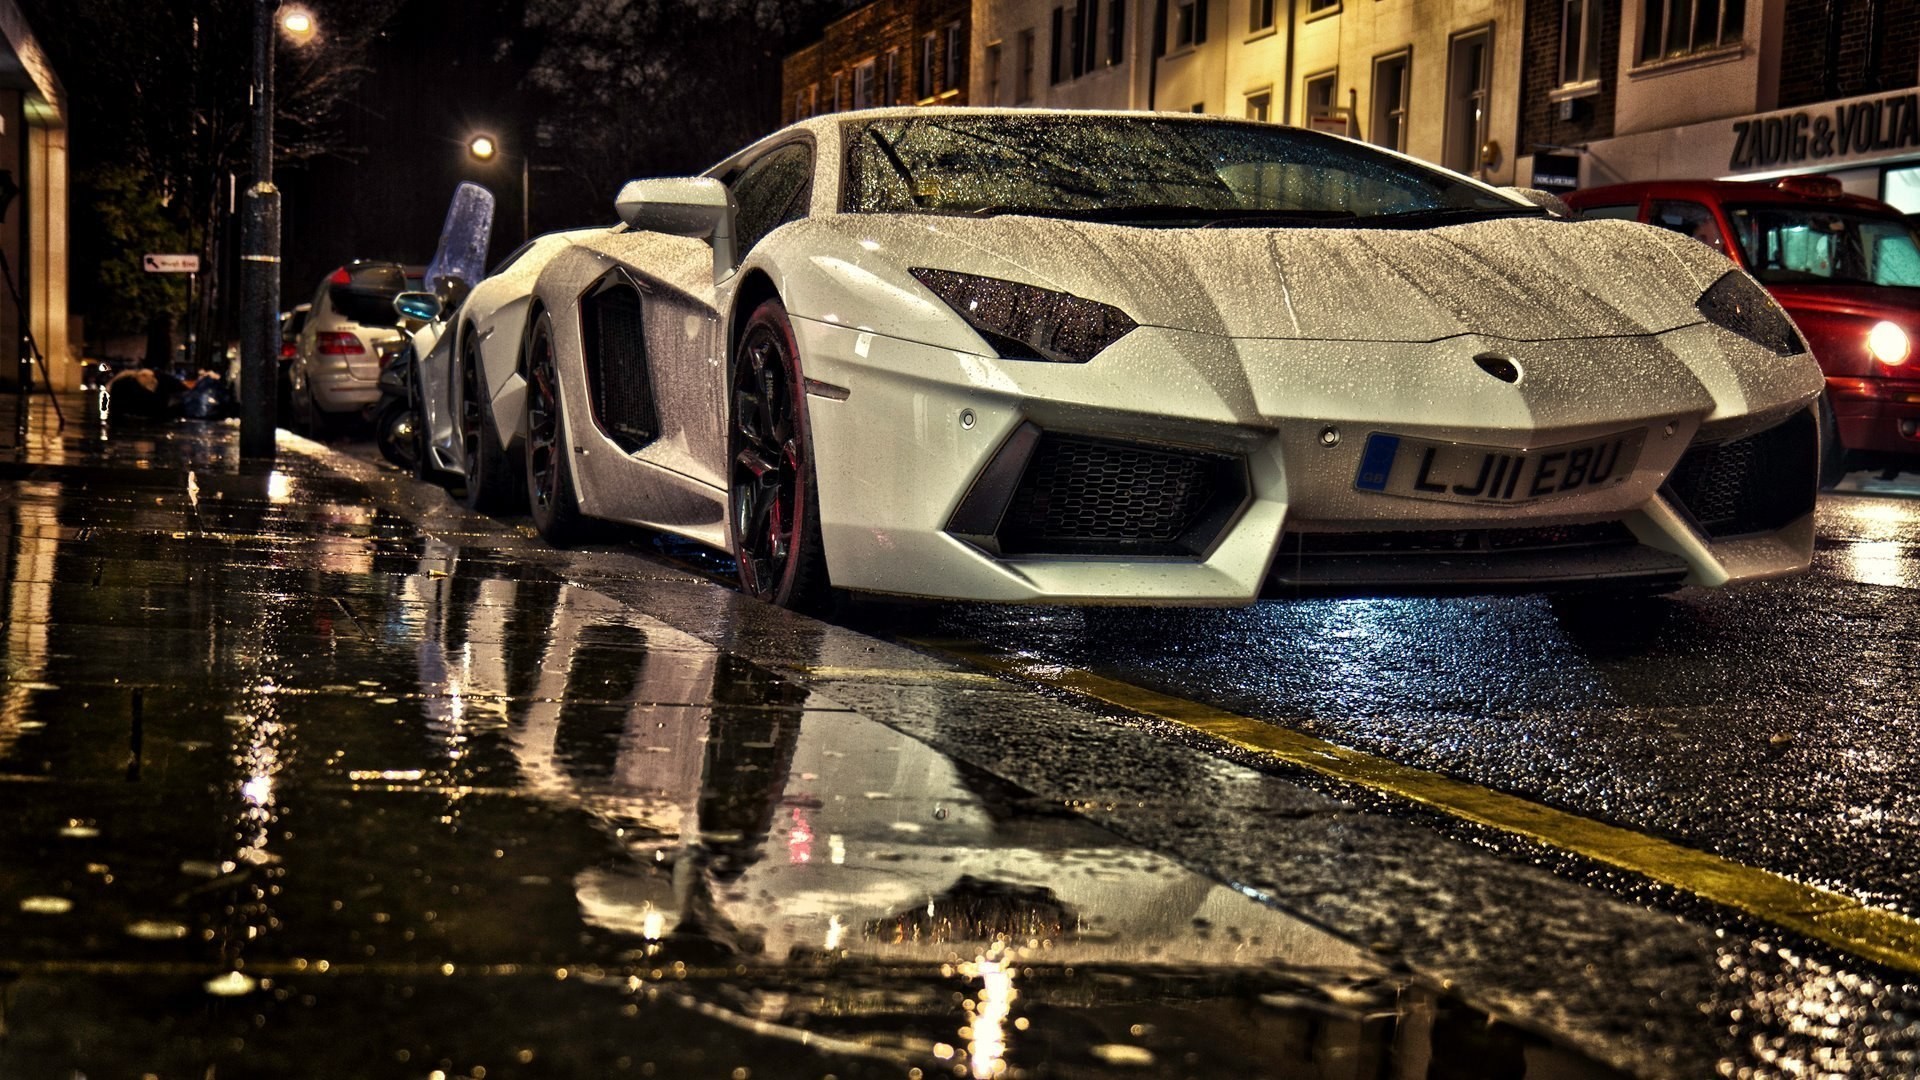 Lamborghini Aventador Wallpapers HD A30 White - lamborghini aventador desktop sports cars, race cars, luxury cars, expensive cars, wallpapers pictures images free download